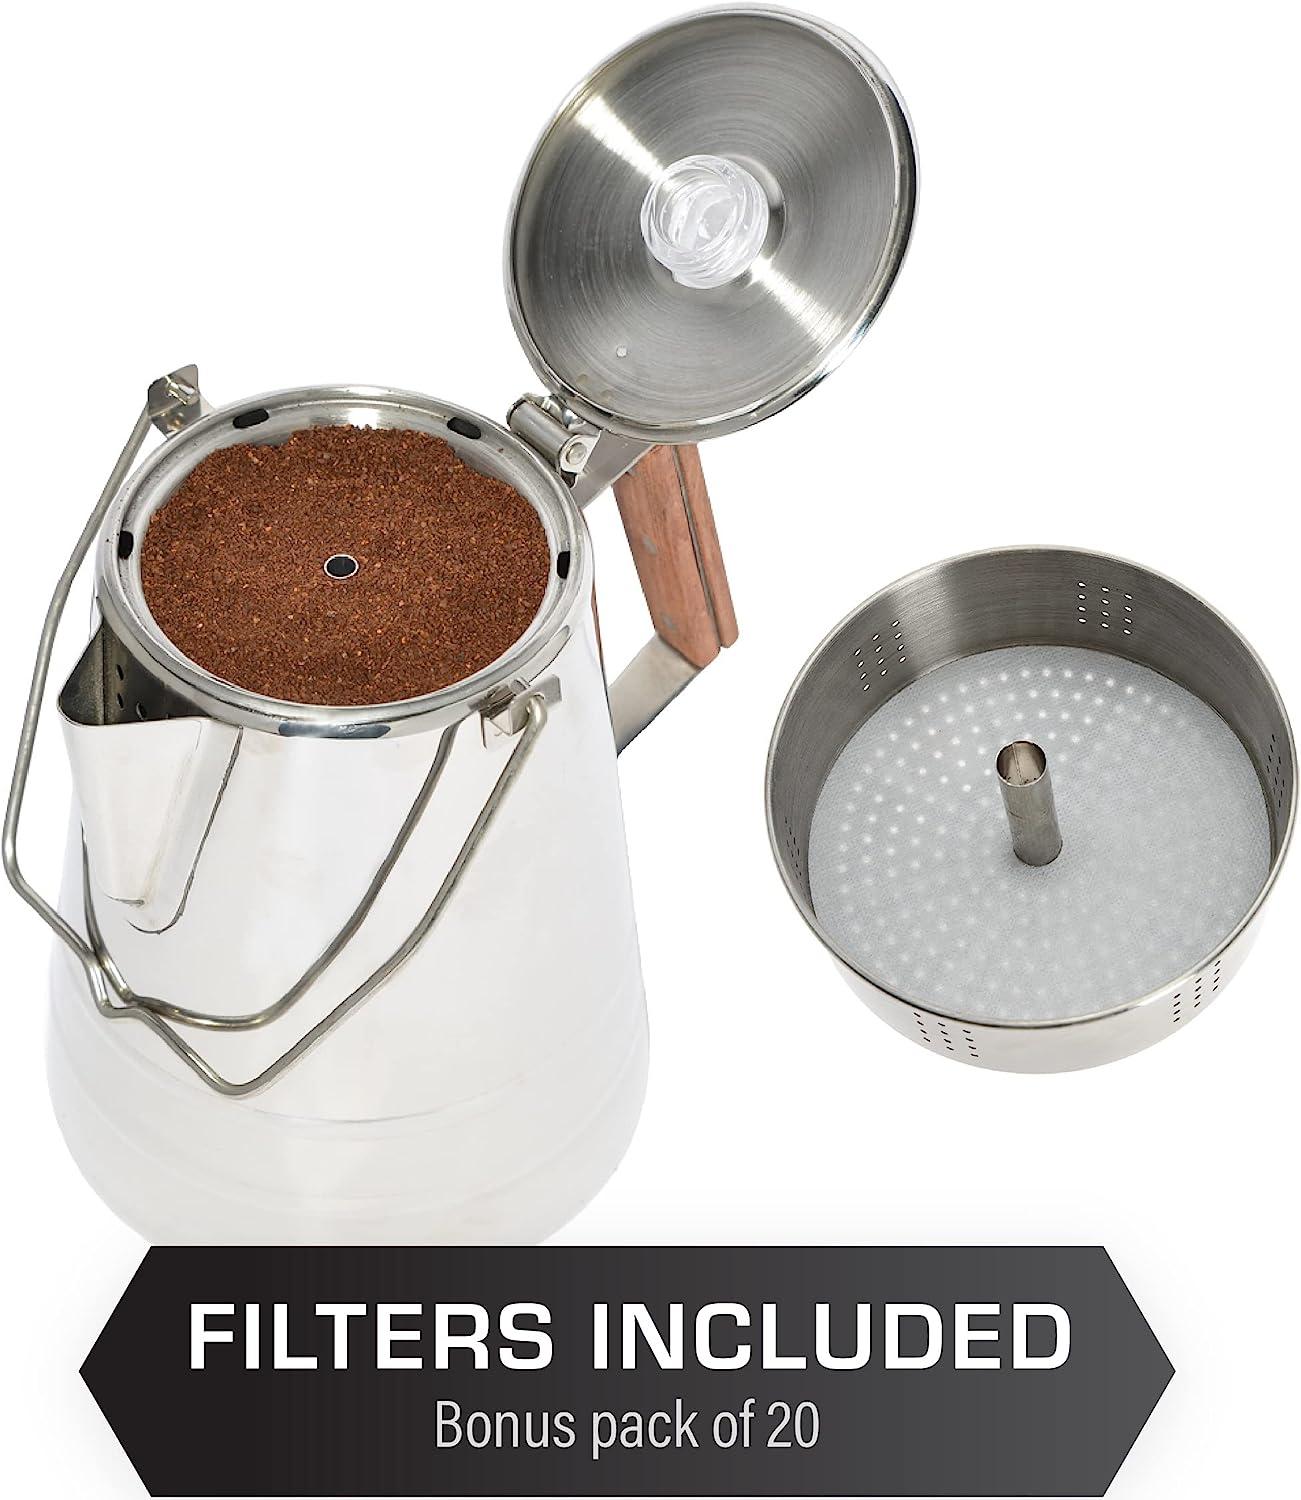 COLETTI Butte Camping Coffee Pot - Campfire Coffee Pot - Stainless